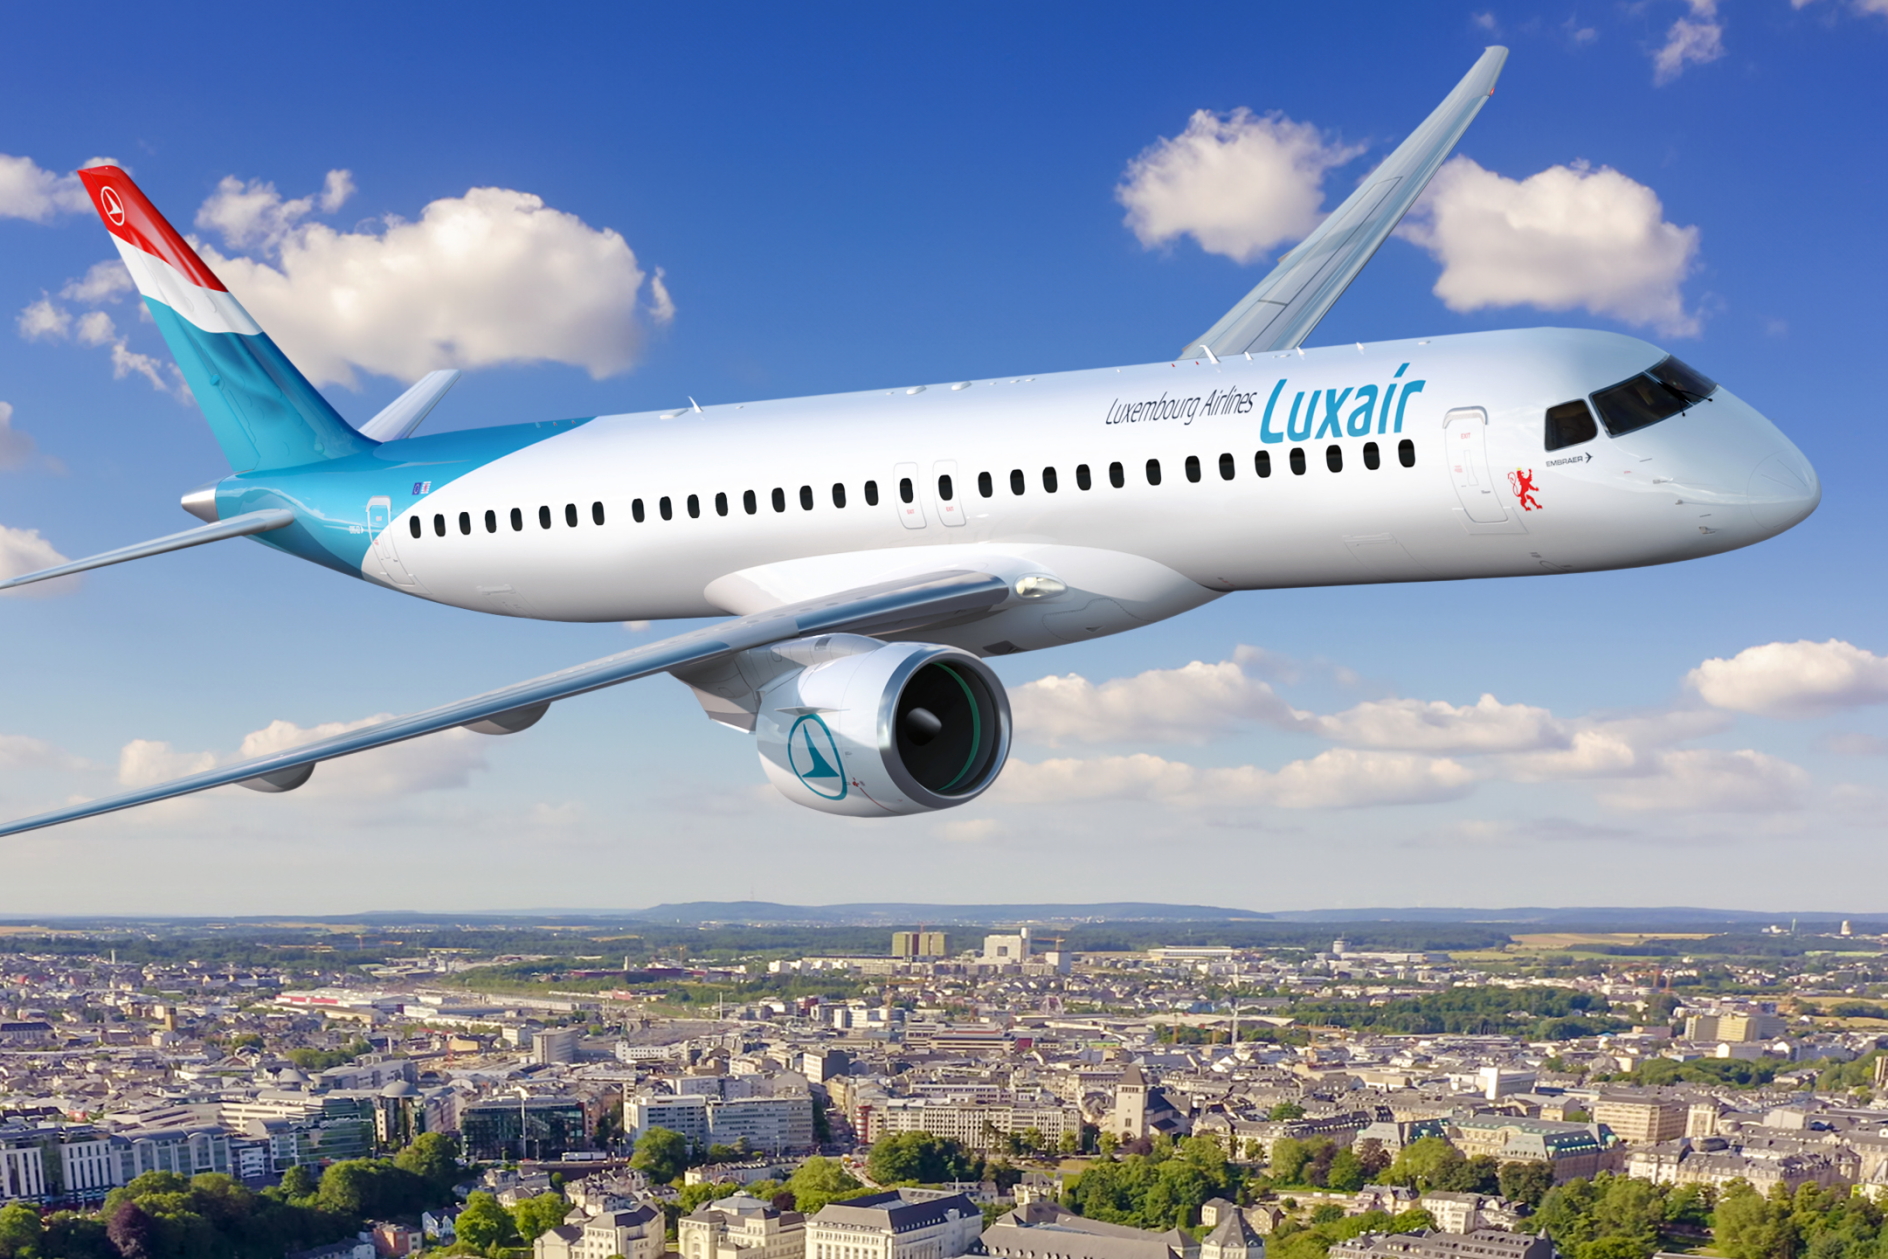 Luxair Embraer E195-E2. Click to enlarge.